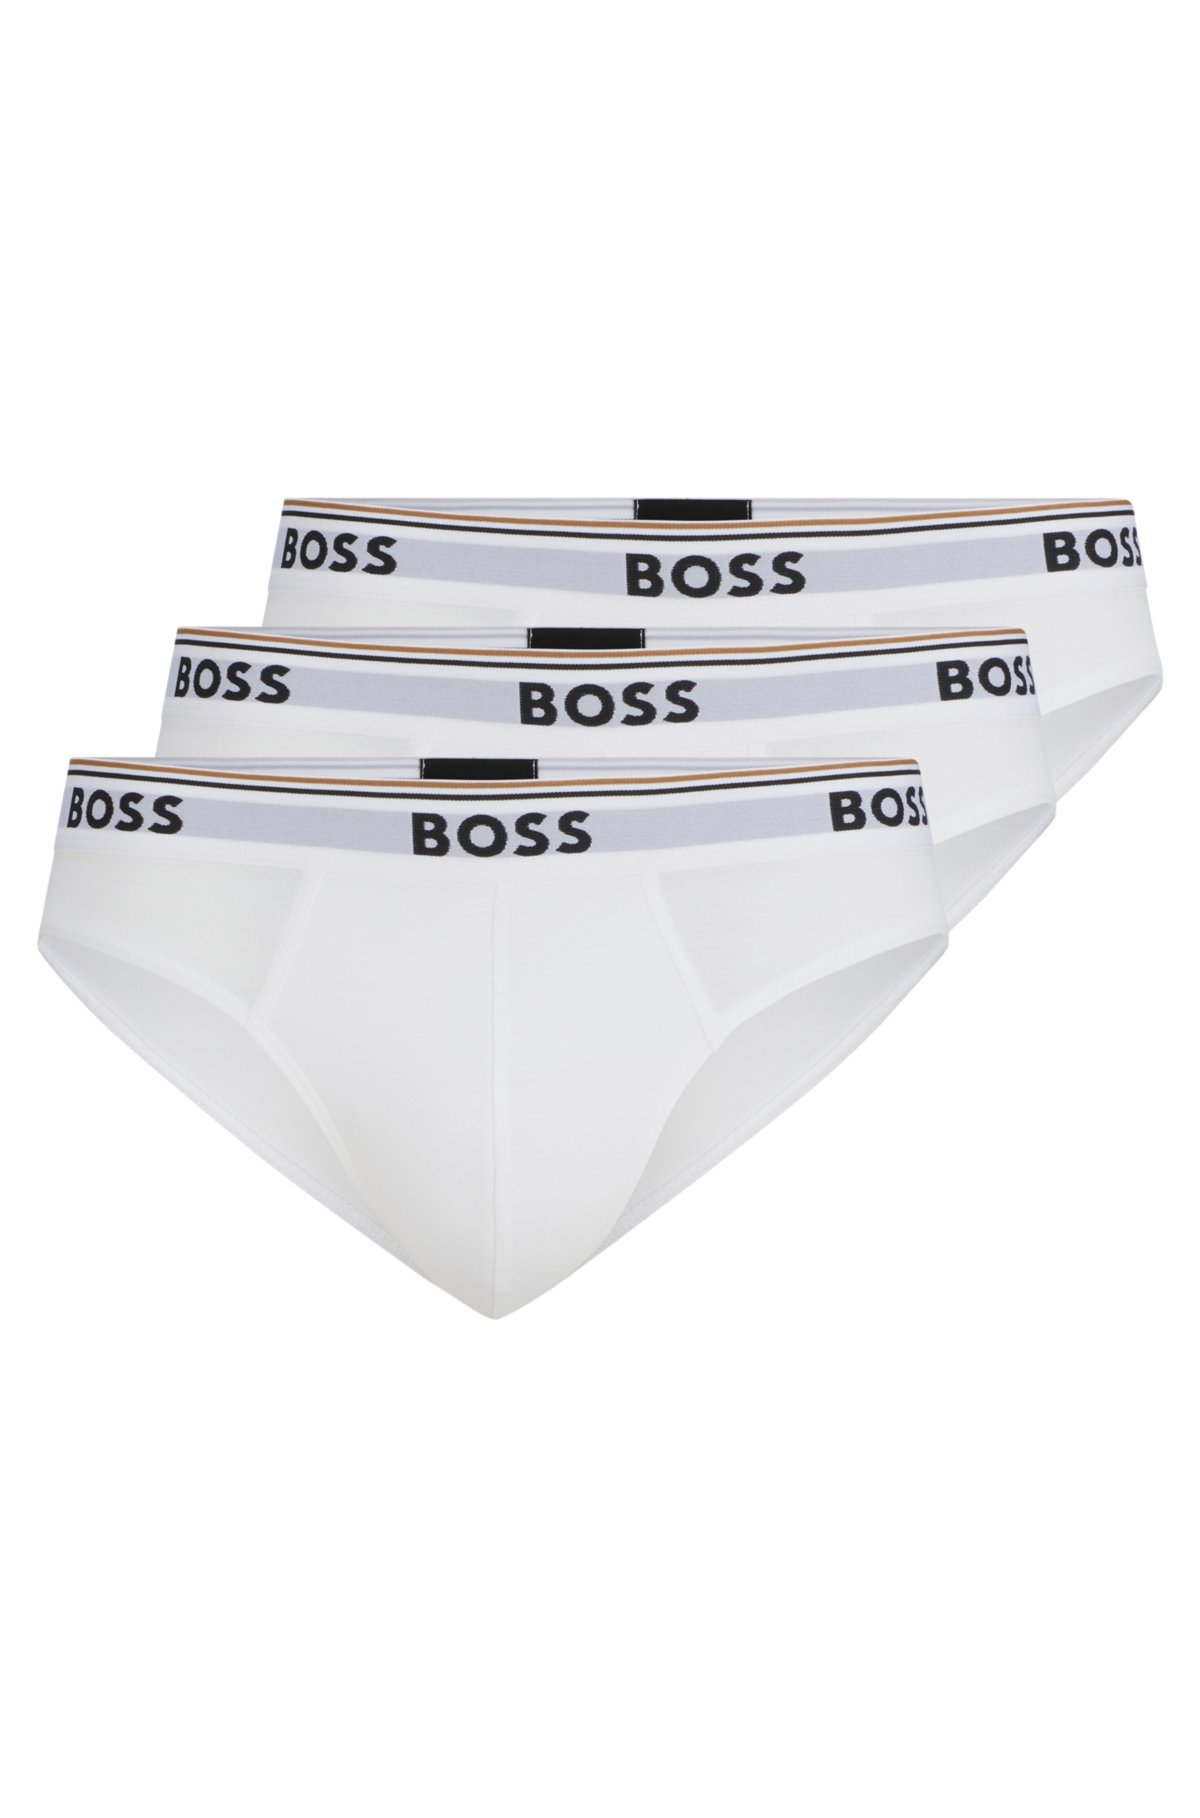 Briefs in a triple pack - white, Slips